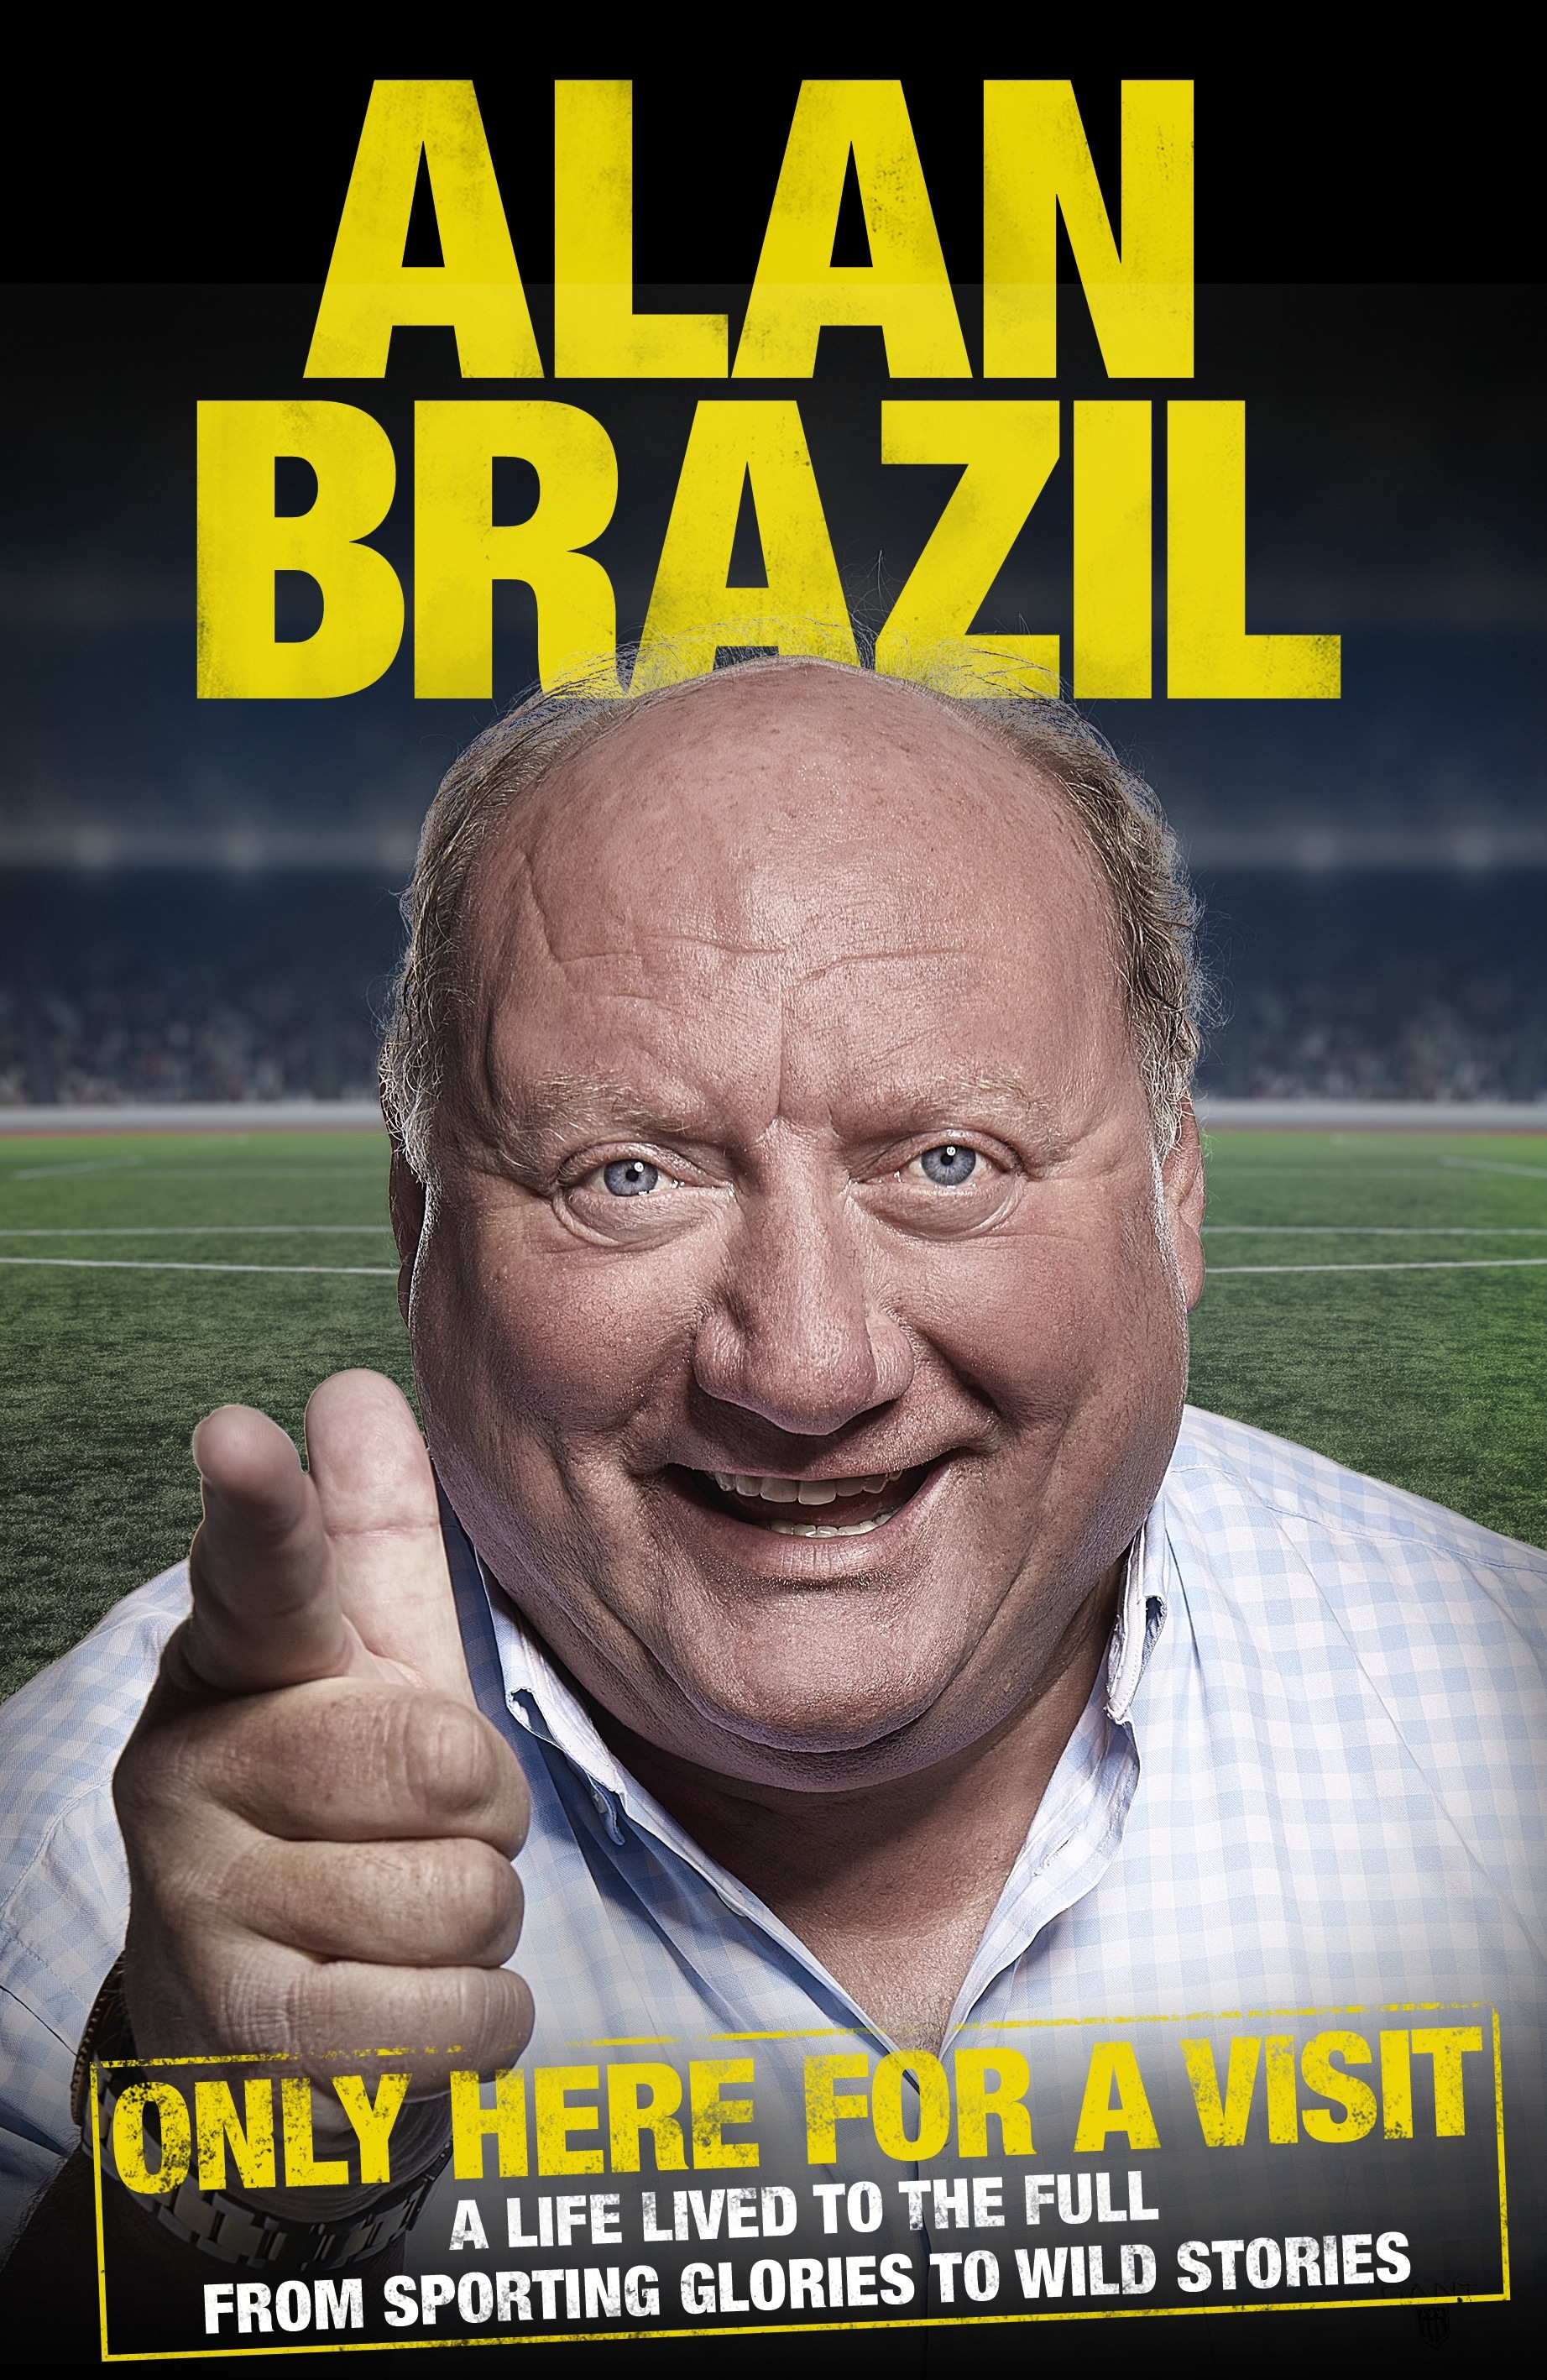 Book “Only Here For A Visit” by Alan Brazil — October 29, 2020